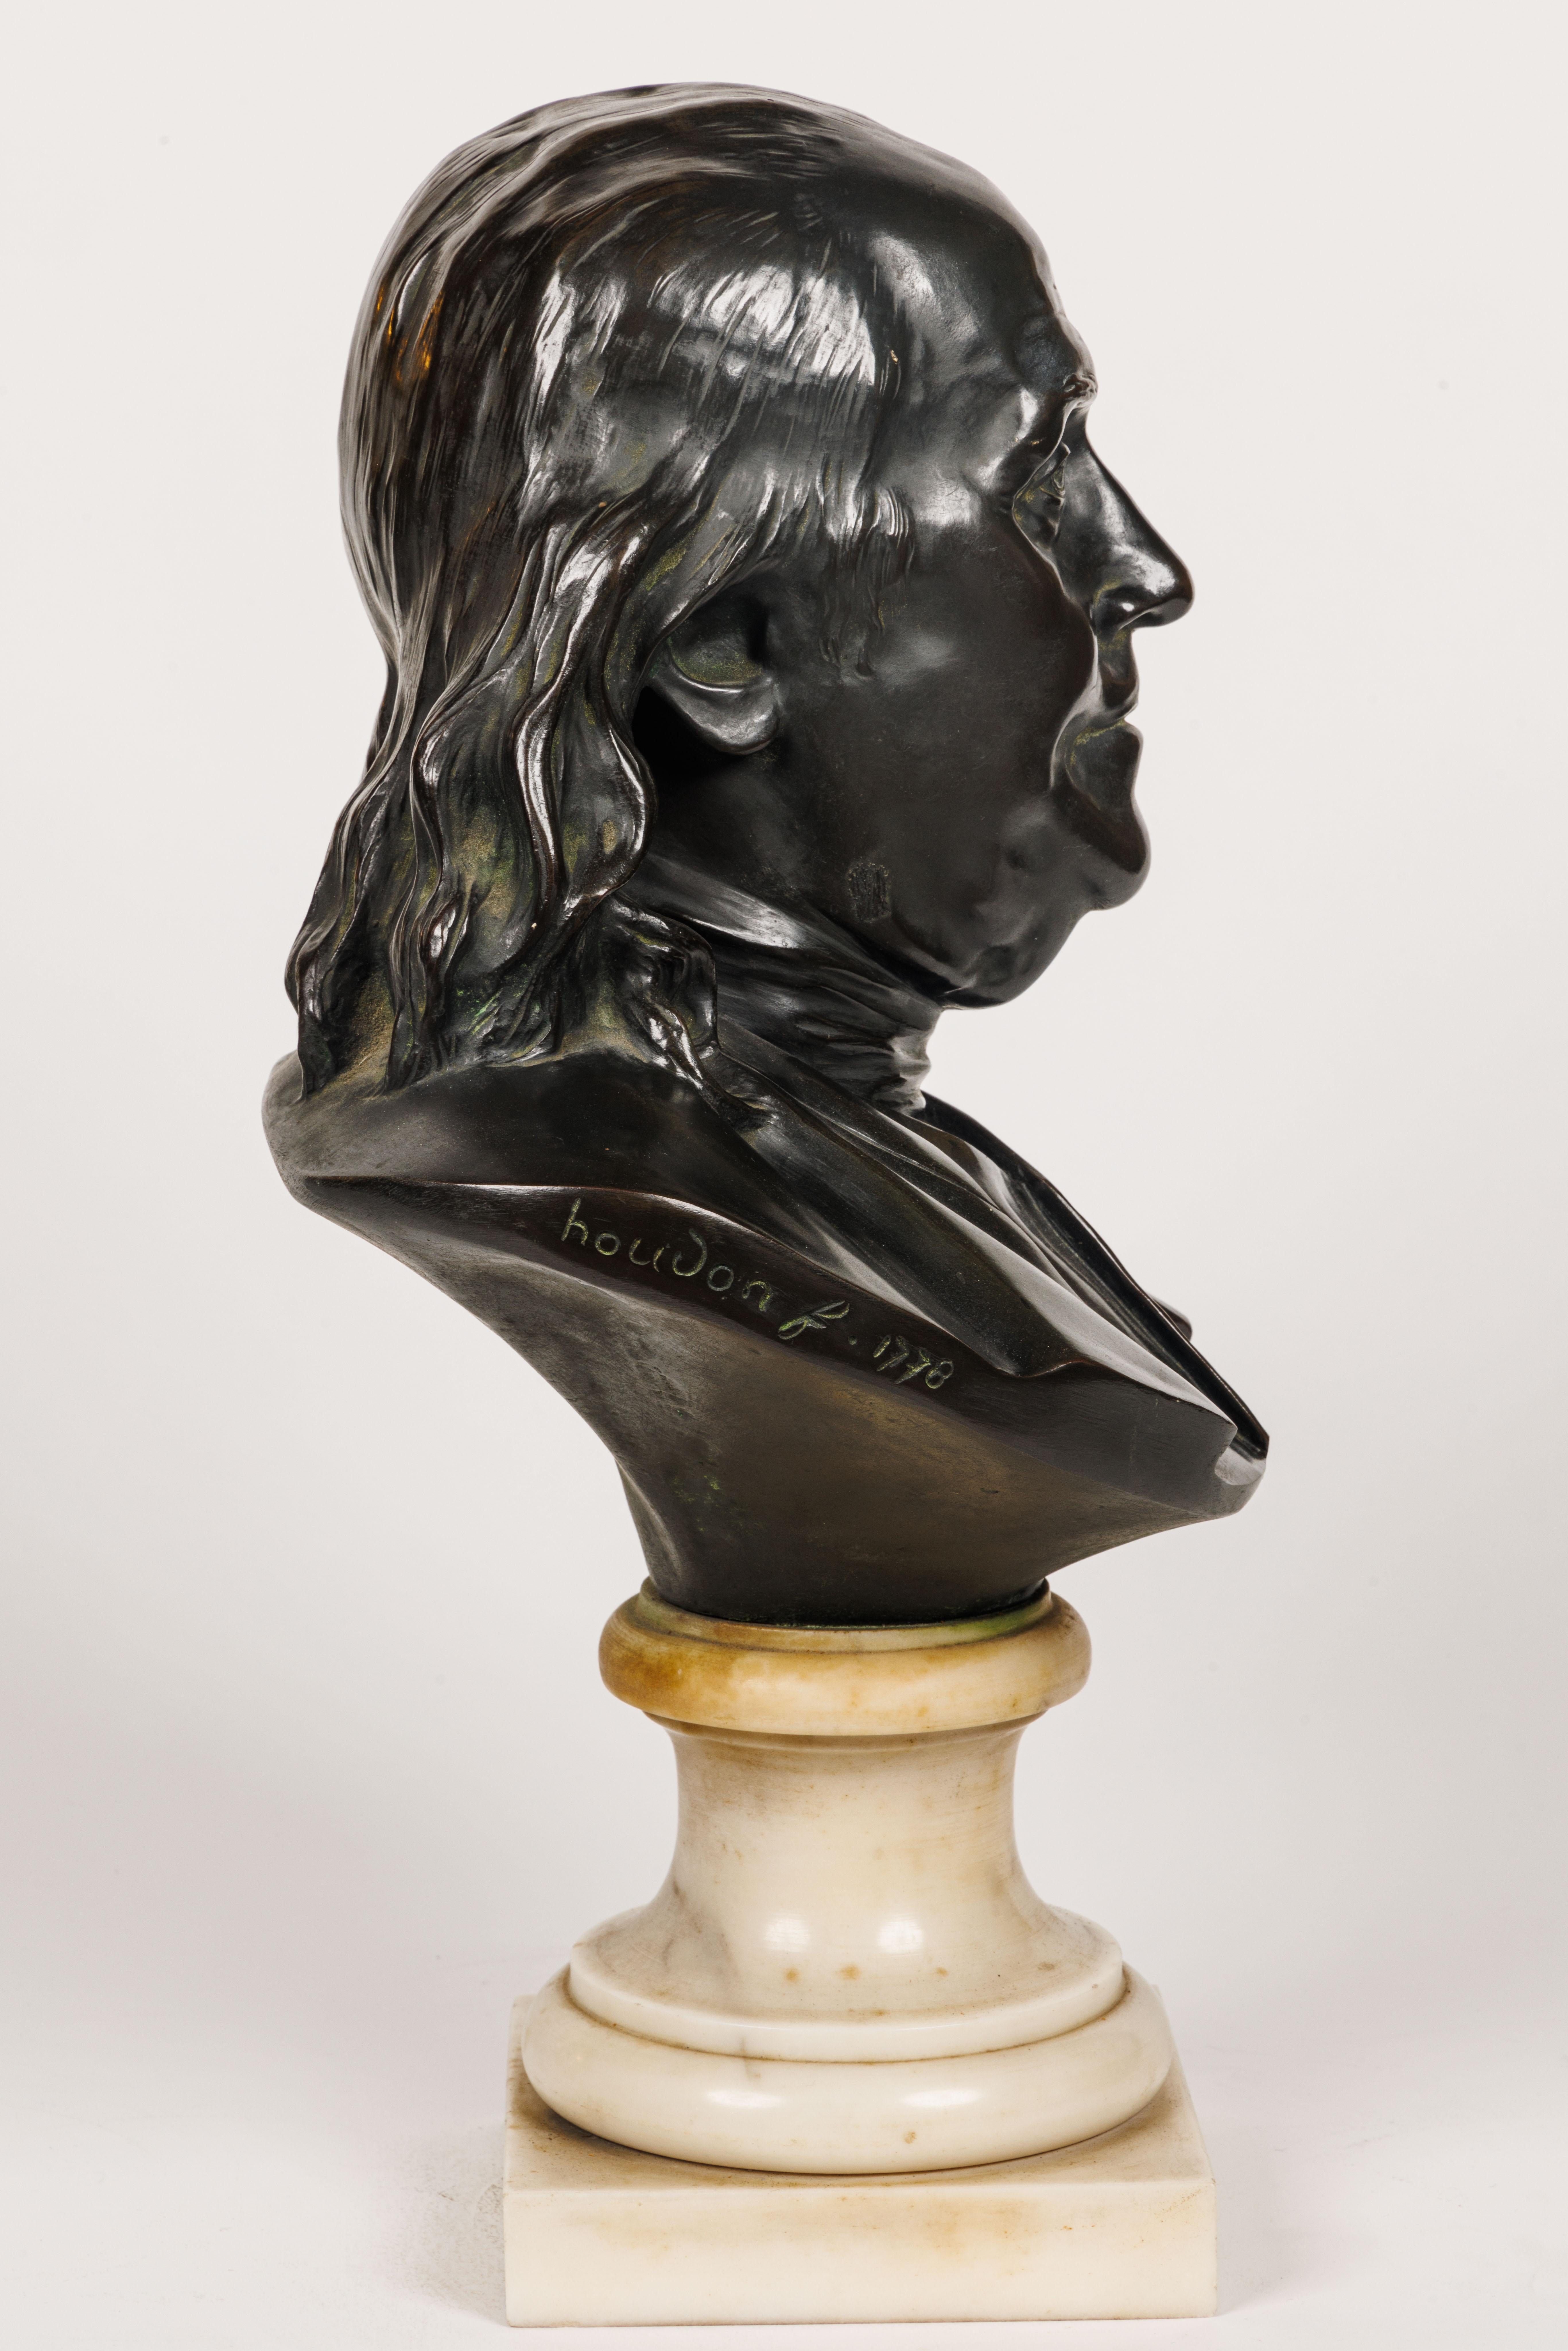 After Jean-Antoine Houdon (French, 1741-1828) a bronze bust of Benjamin Franklin on a white marble base, circa 1880


This bronze bust of Benjamin Franklin after Jean-Antoine Houdon, is a striking example of 18th century portraiture. Houdon was a